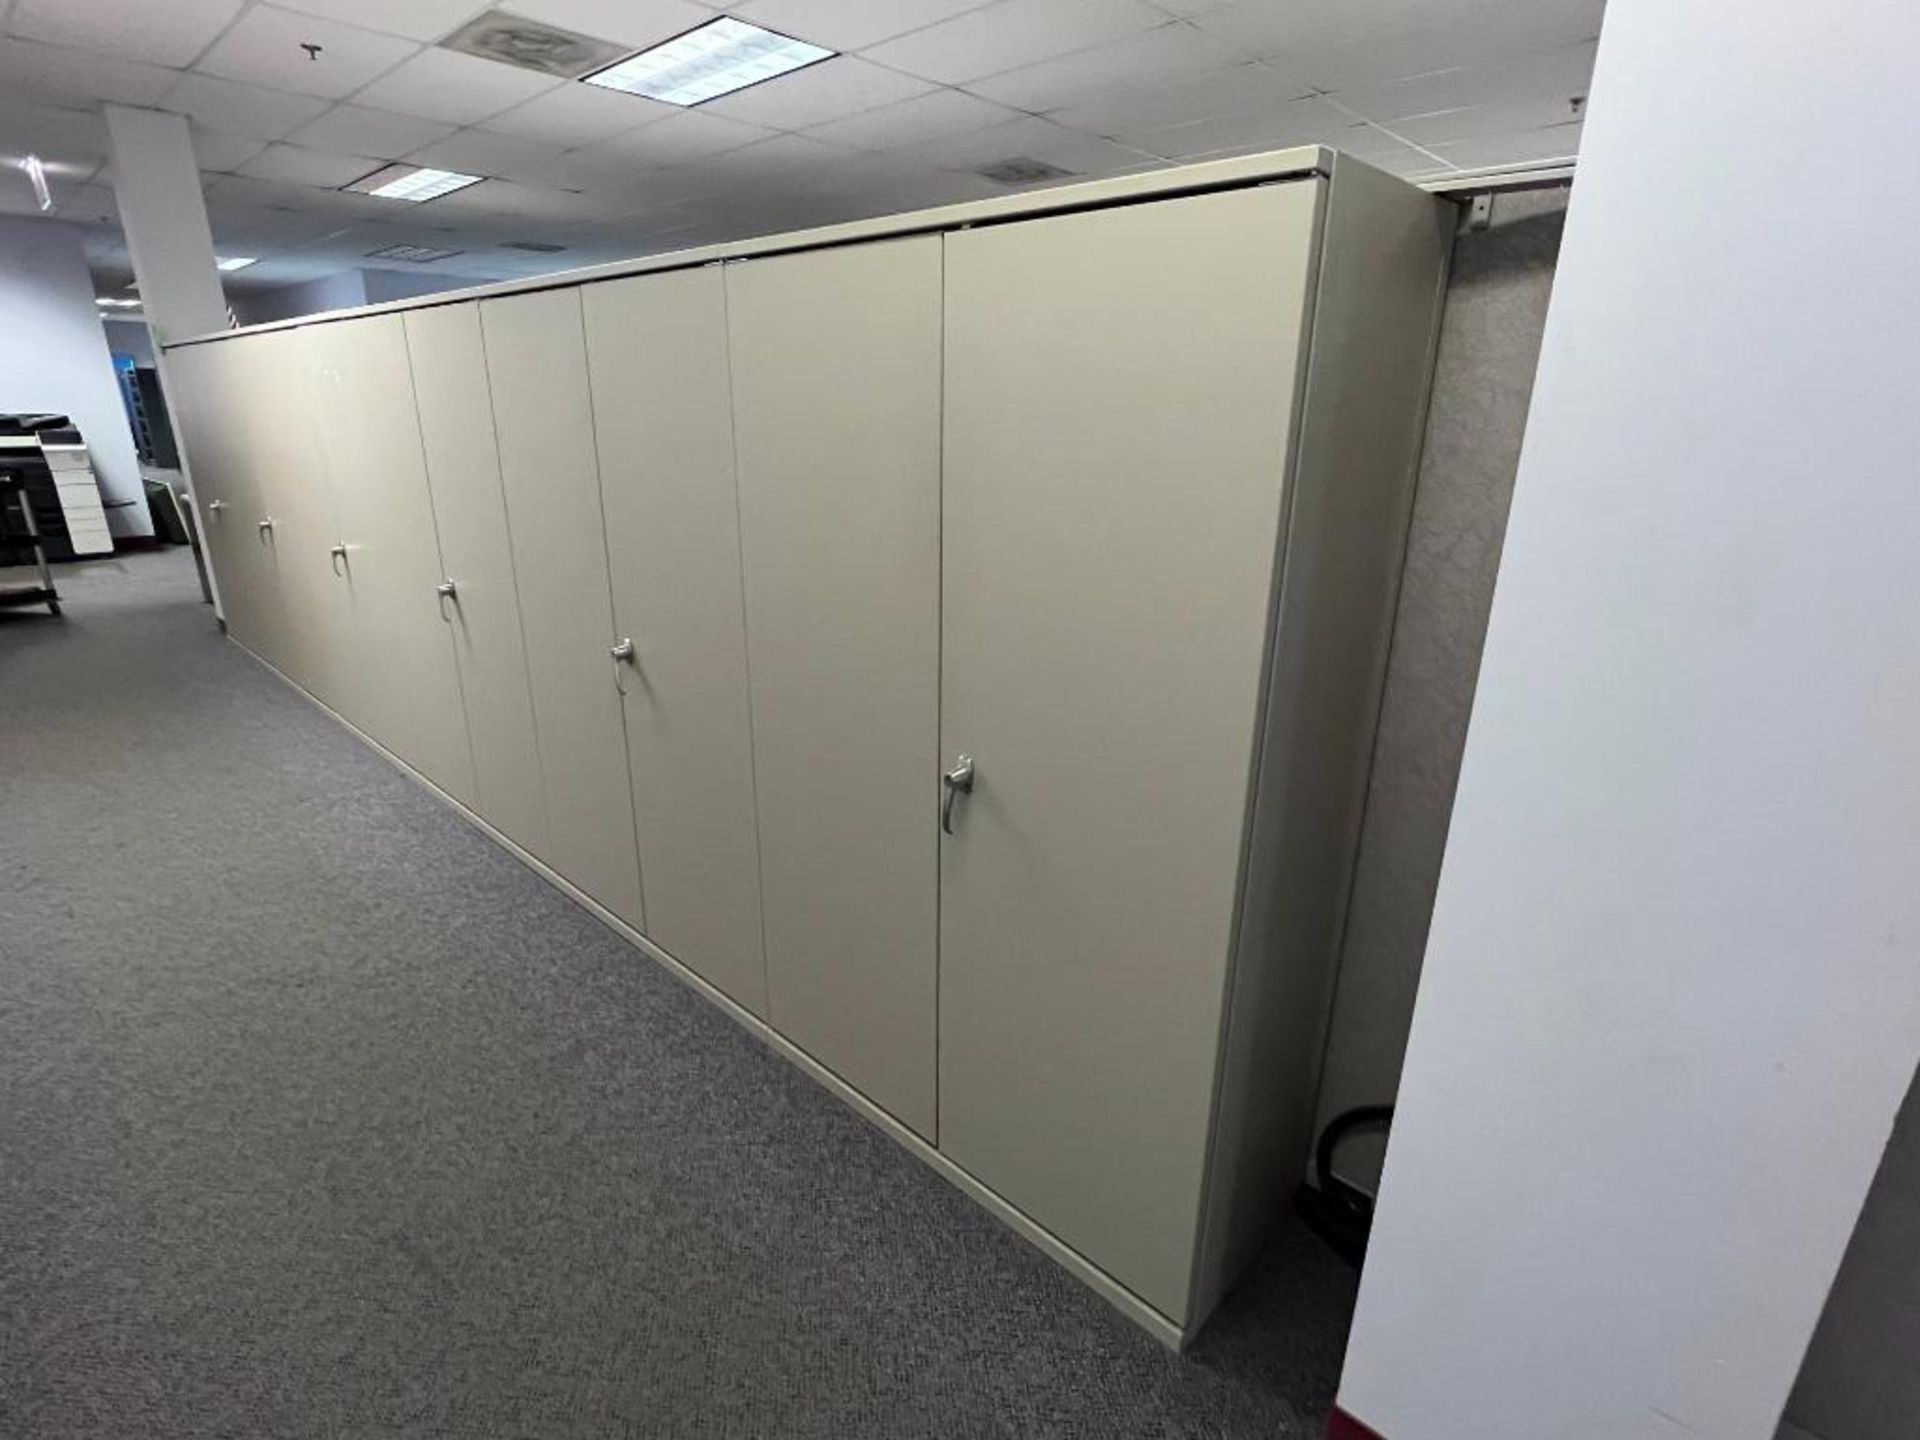 Lot of (6) Sections of 2-Door Storage Cabinets - Image 2 of 2